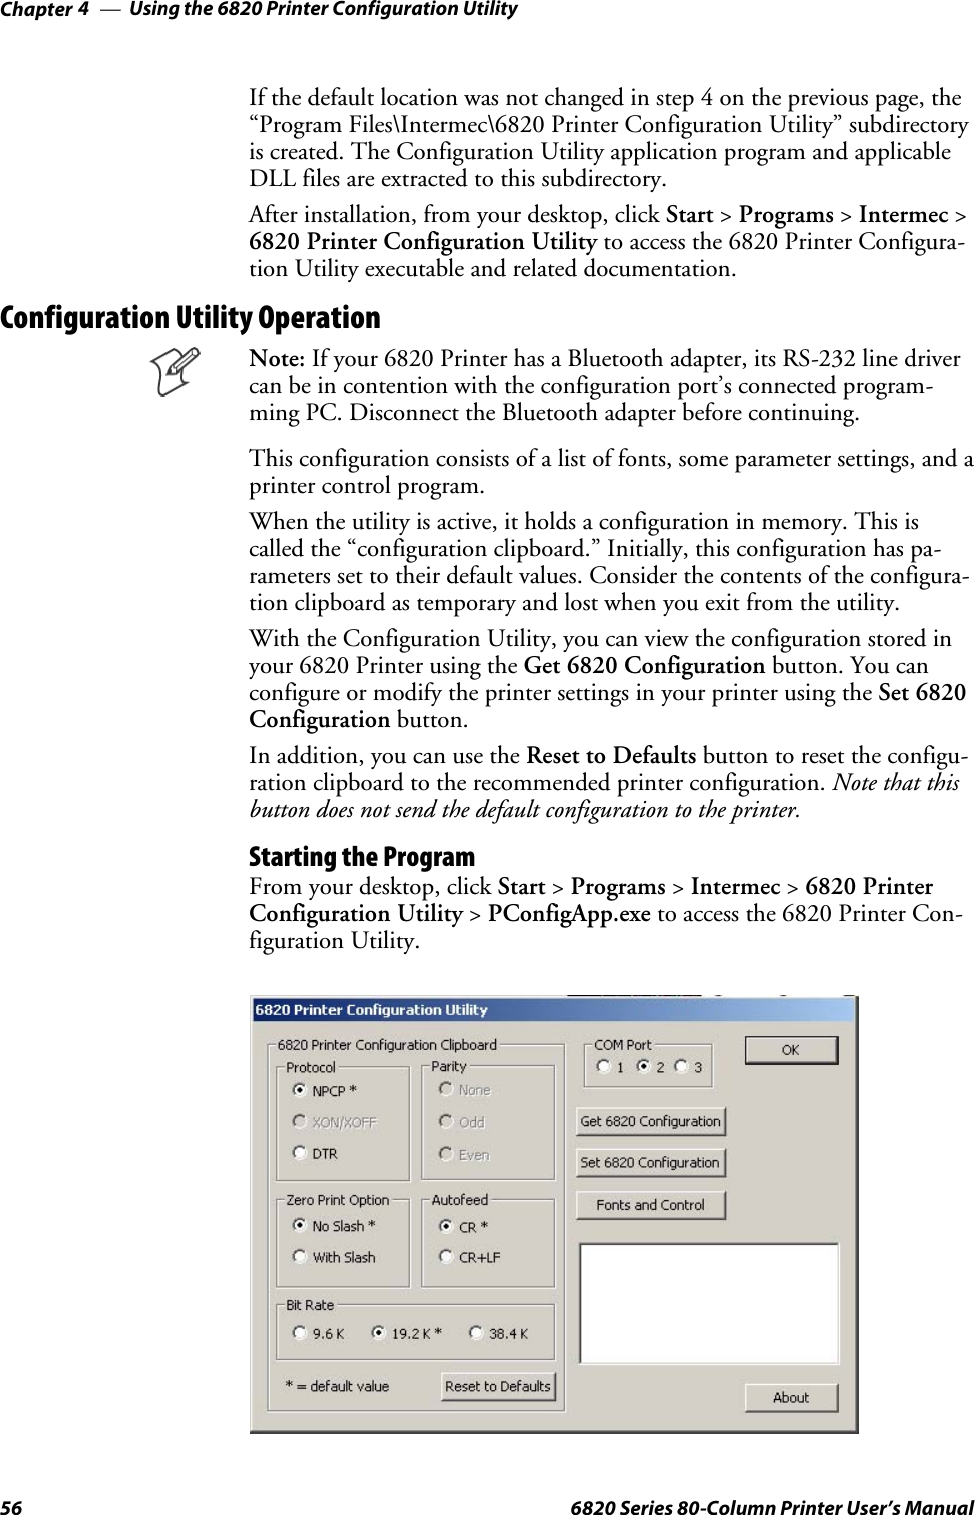 Using the 6820 Printer Configuration UtilityChapter —456 6820 Series 80-Column Printer User’s ManualIf the default location was not changed in step 4 on the previous page, the“Program Files\Intermec\6820 Printer Configuration Utility” subdirectoryis created. The Configuration Utility application program and applicableDLL files are extracted to this subdirectory.After installation, from your desktop, click Start &gt;Programs &gt;Intermec &gt;6820 Printer Configuration Utility to access the 6820 Printer Configura-tion Utility executable and related documentation.Configuration Utility OperationNote: If your 6820 Printer has a Bluetooth adapter, its RS-232 line drivercanbeincontentionwiththeconfigurationport’sconnectedprogram-ming PC. Disconnect the Bluetooth adapter before continuing.This configuration consists of a list of fonts, some parameter settings, and aprinter control program.When the utility is active, it holds a configuration in memory. This iscalled the “configuration clipboard.” Initially, this configuration has pa-rameters set to their default values. Consider the contents of the configura-tion clipboard as temporary and lost when you exit from the utility.With the Configuration Utility, you can view the configuration stored inyour 6820 Printer using the Get 6820 Configuration button. You canconfigure or modify the printer settings in your printer using the Set 6820Configuration button.In addition, you can use the Reset to Defaults button to reset the configu-ration clipboard to the recommended printer configuration. Note that thisbutton does not send the default configuration to the printer.Starting the ProgramFrom your desktop, click Start &gt;Programs &gt;Intermec &gt;6820 PrinterConfiguration Utility &gt;PConfigApp.exe to access the 6820 Printer Con-figuration Utility.